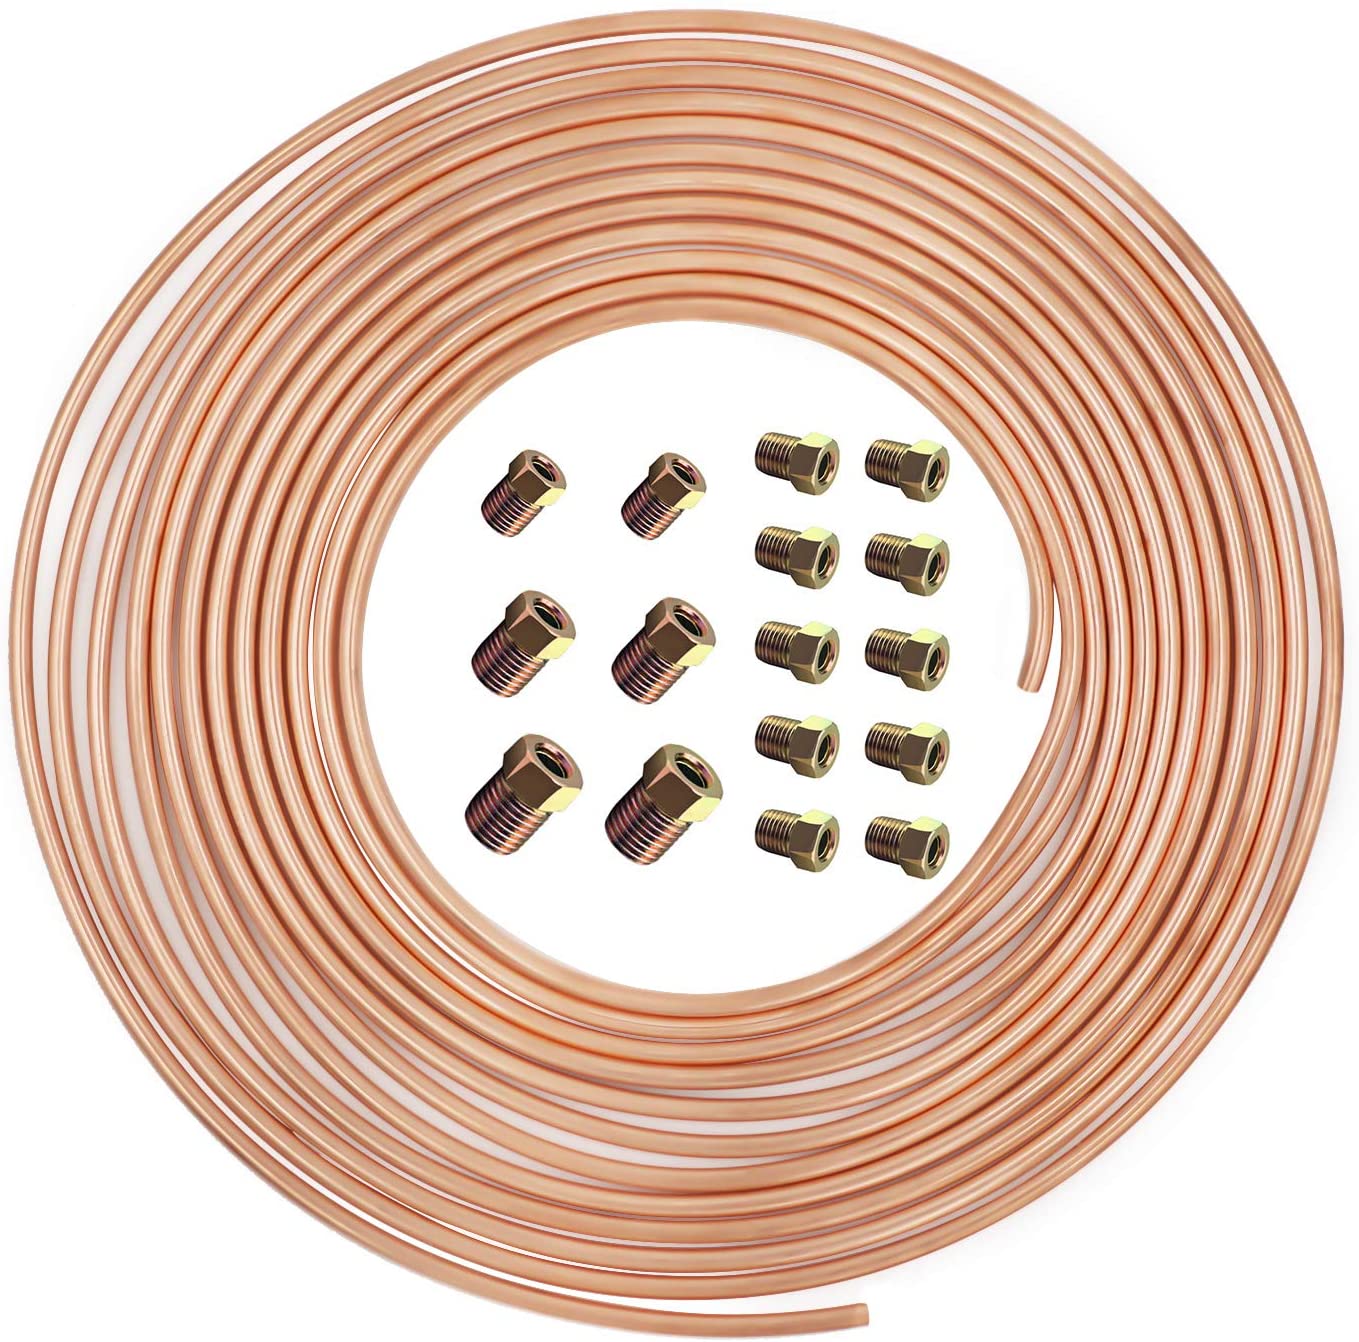 25 Ft. of 3/16 in Brake Line Flexible, Easy to Bend Replacement Tubing Kit (Includes 16 Fittings) -Inverted Flare, SAE Thread (HC040030)